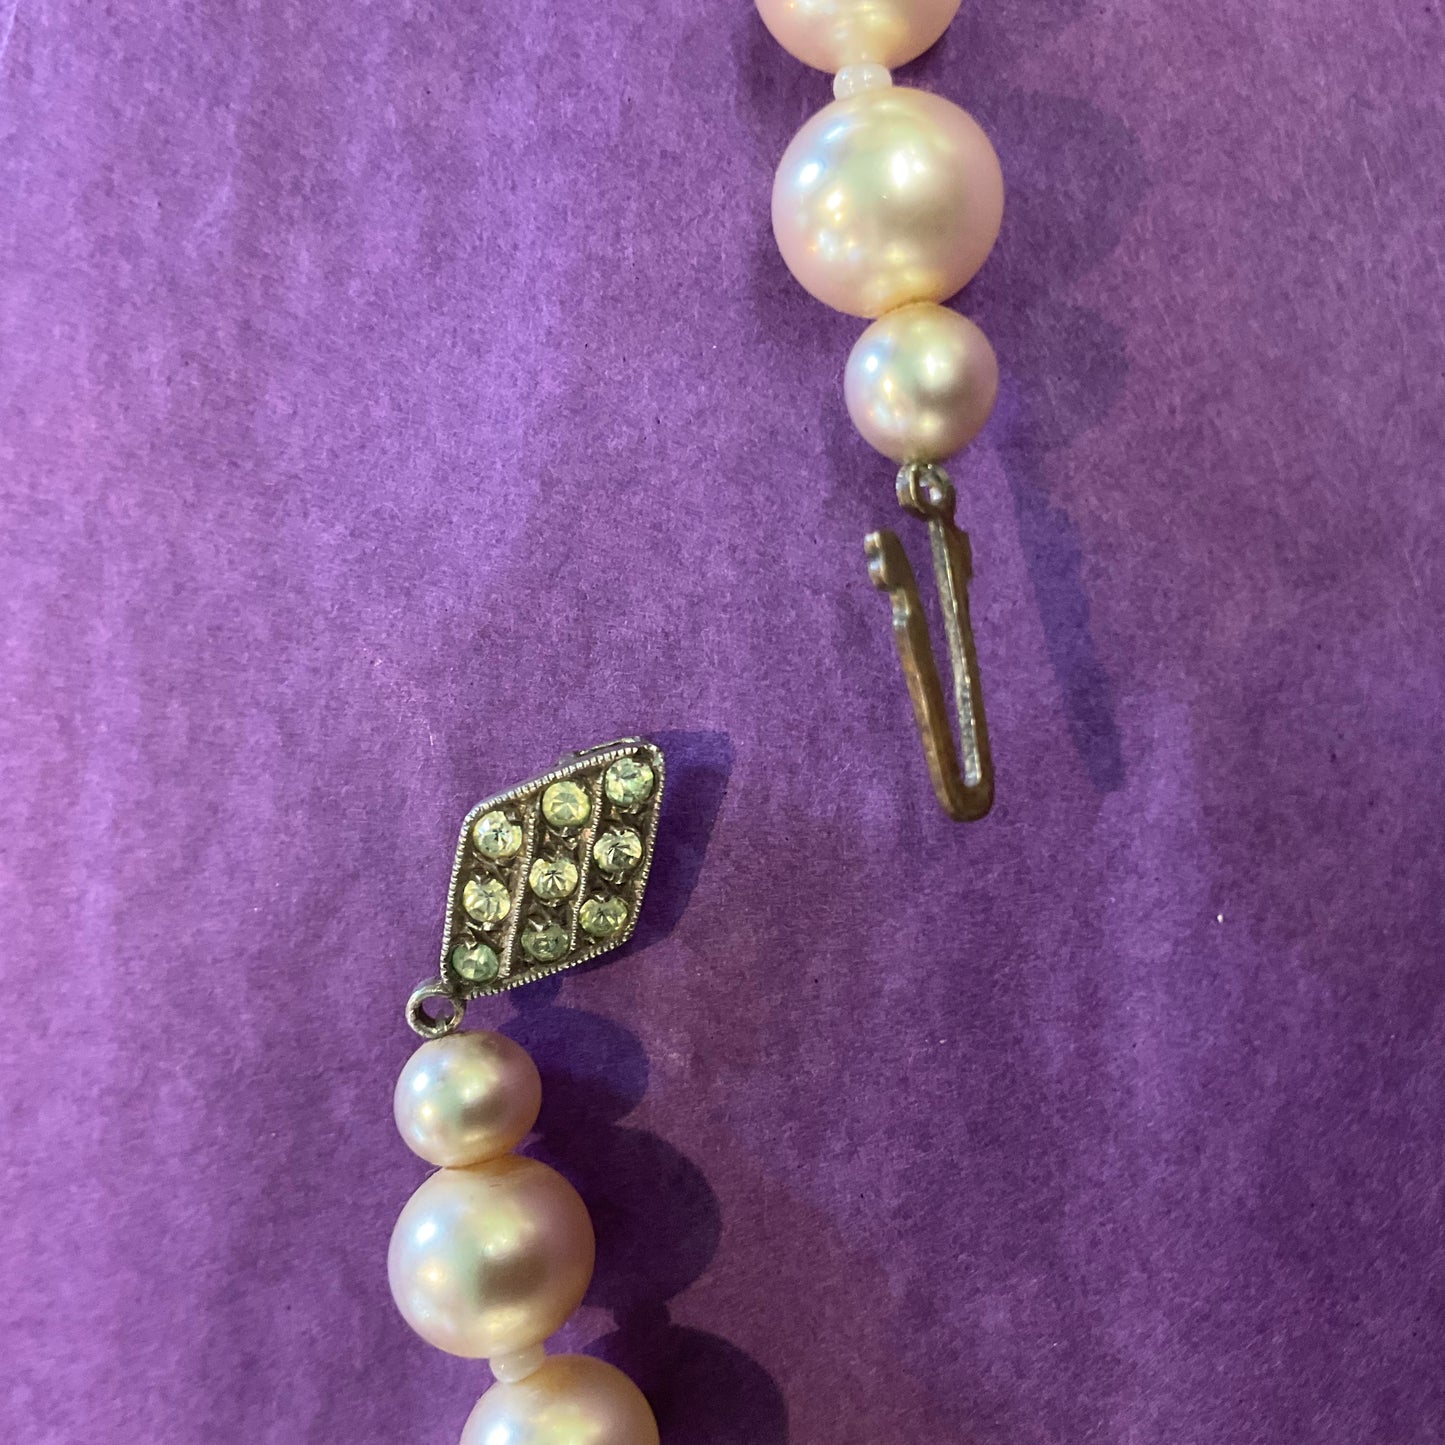 Vintage 1950s faux pearl necklace with silver clasp